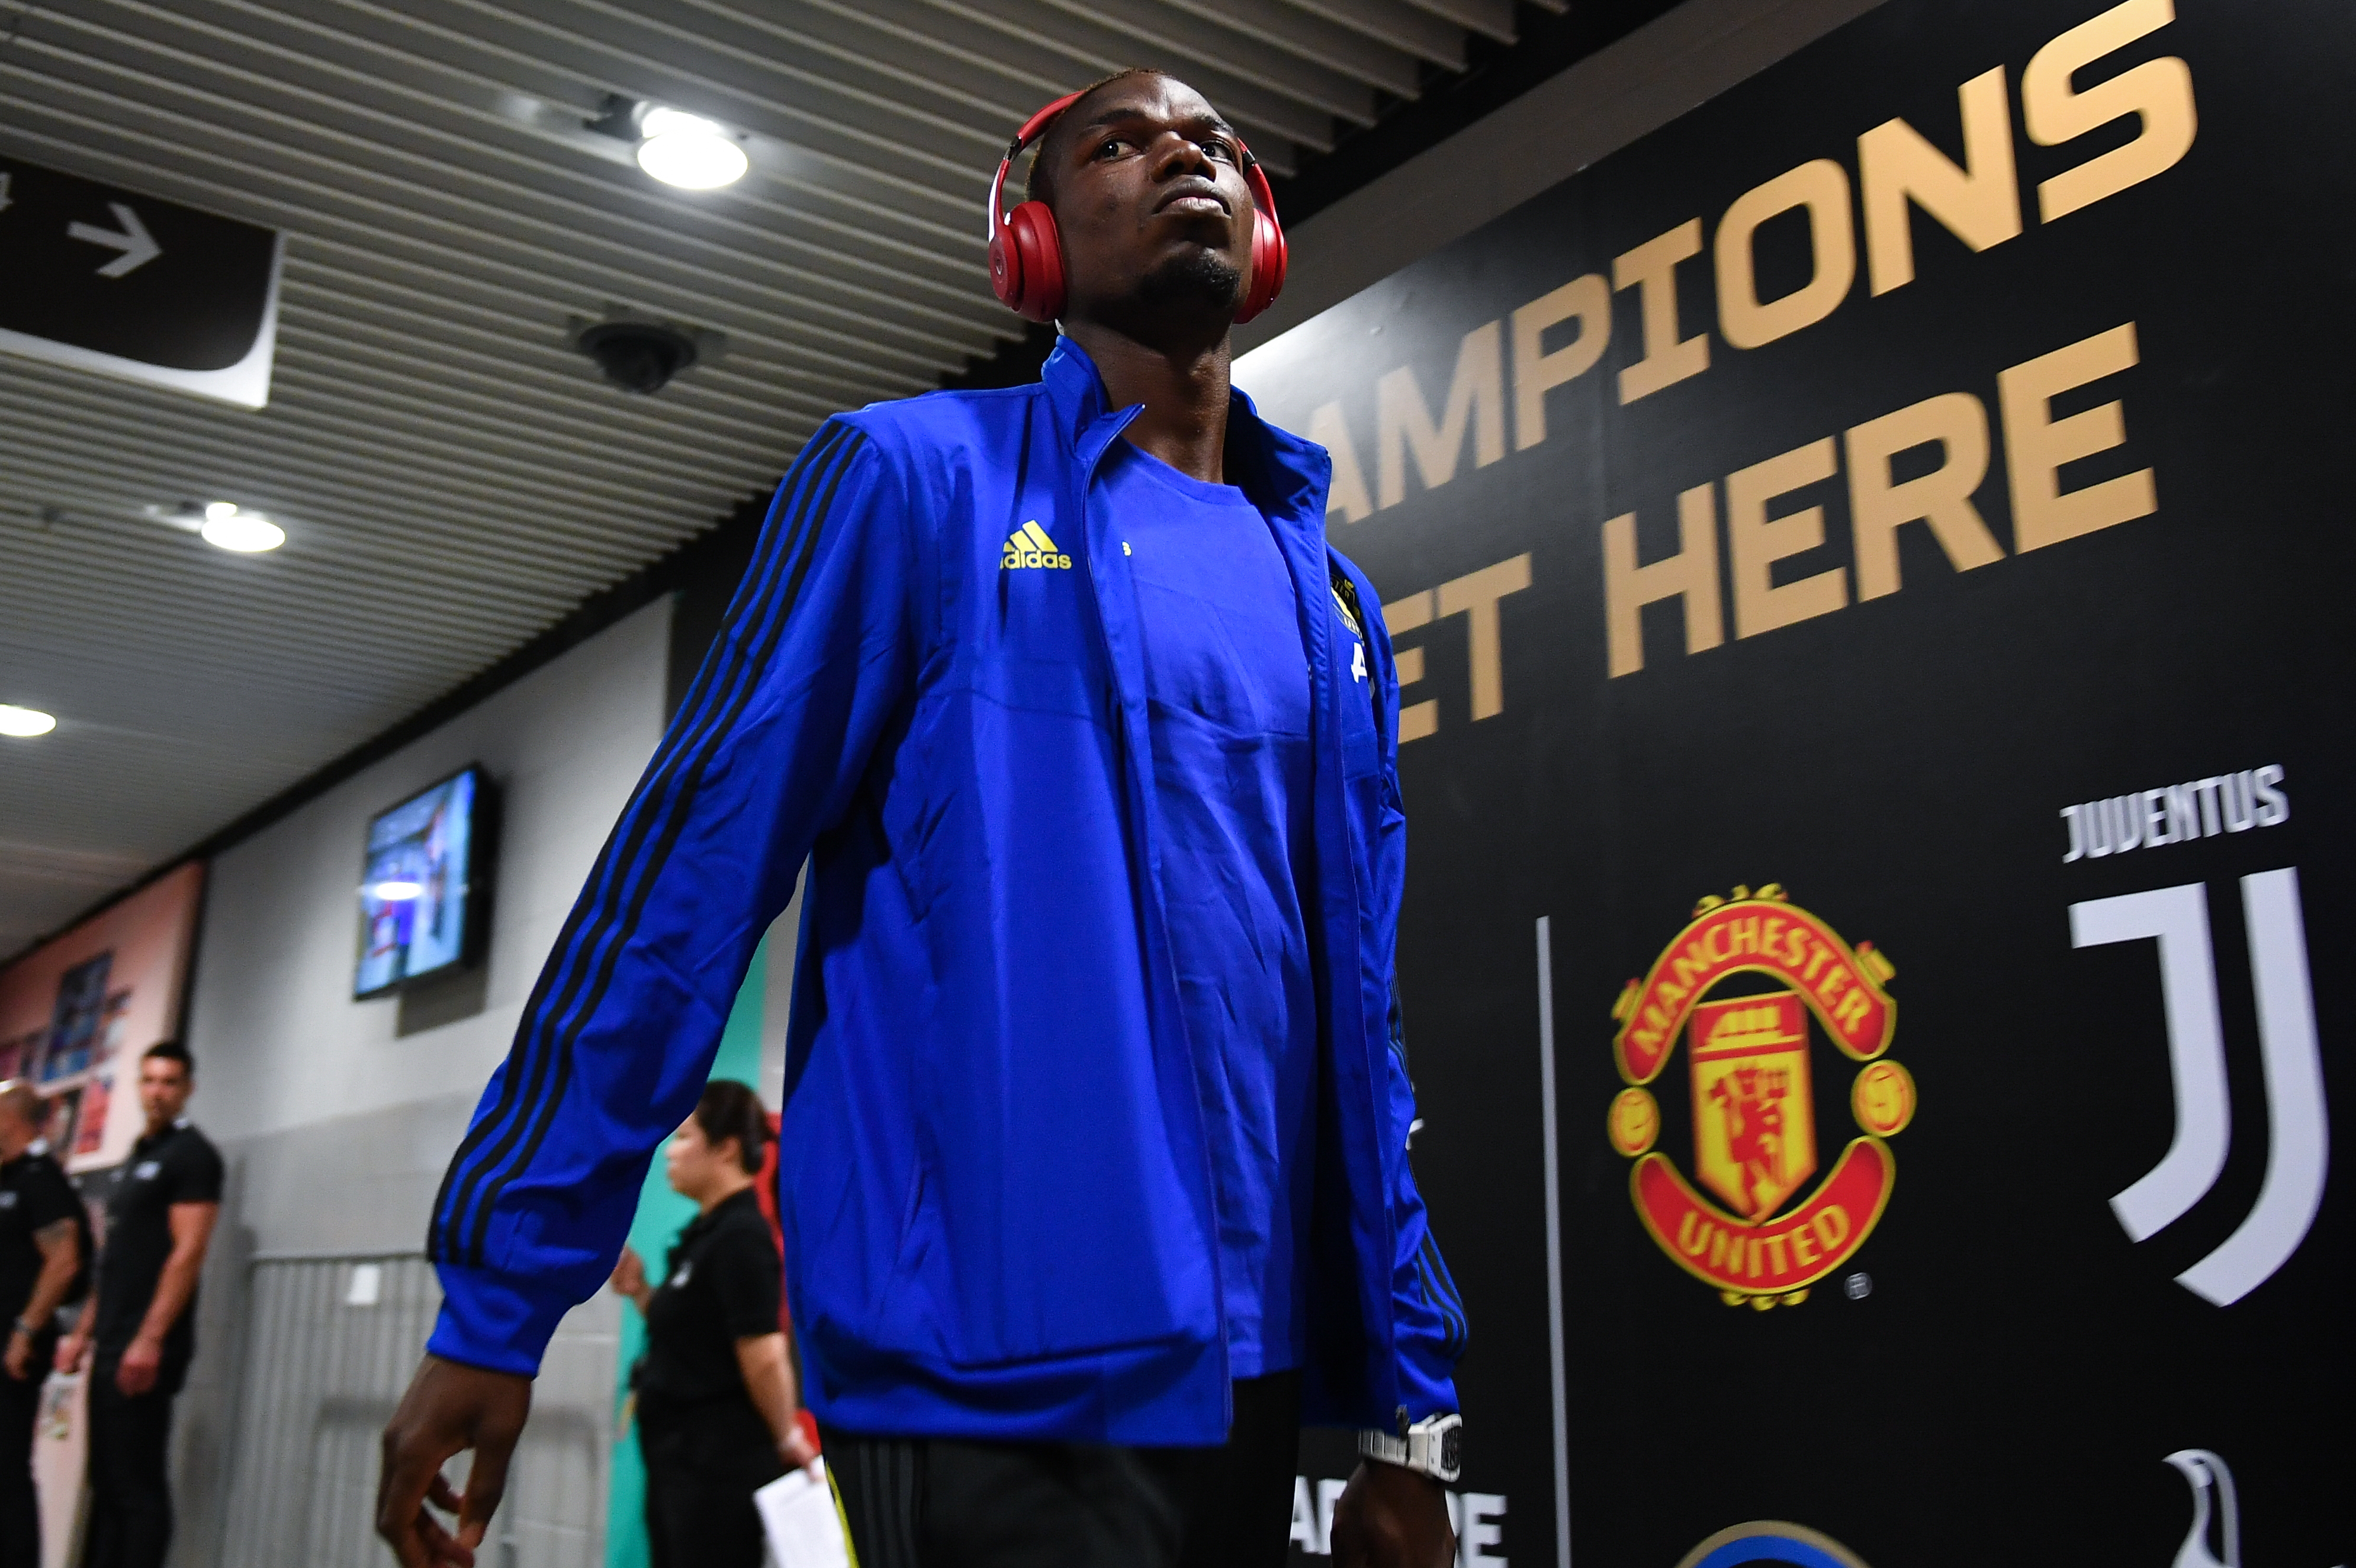 SINGAPORE - JULY 20: Paul Pogba of Manchester United is seen on arrival at the stadium during the 2019 International Champions Cup match between Manchester United and FC Internazionale at the Singapore National Stadium on July 20, 2019 in Singapore. (Photo by Thananuwat Srirasant/Getty Images)